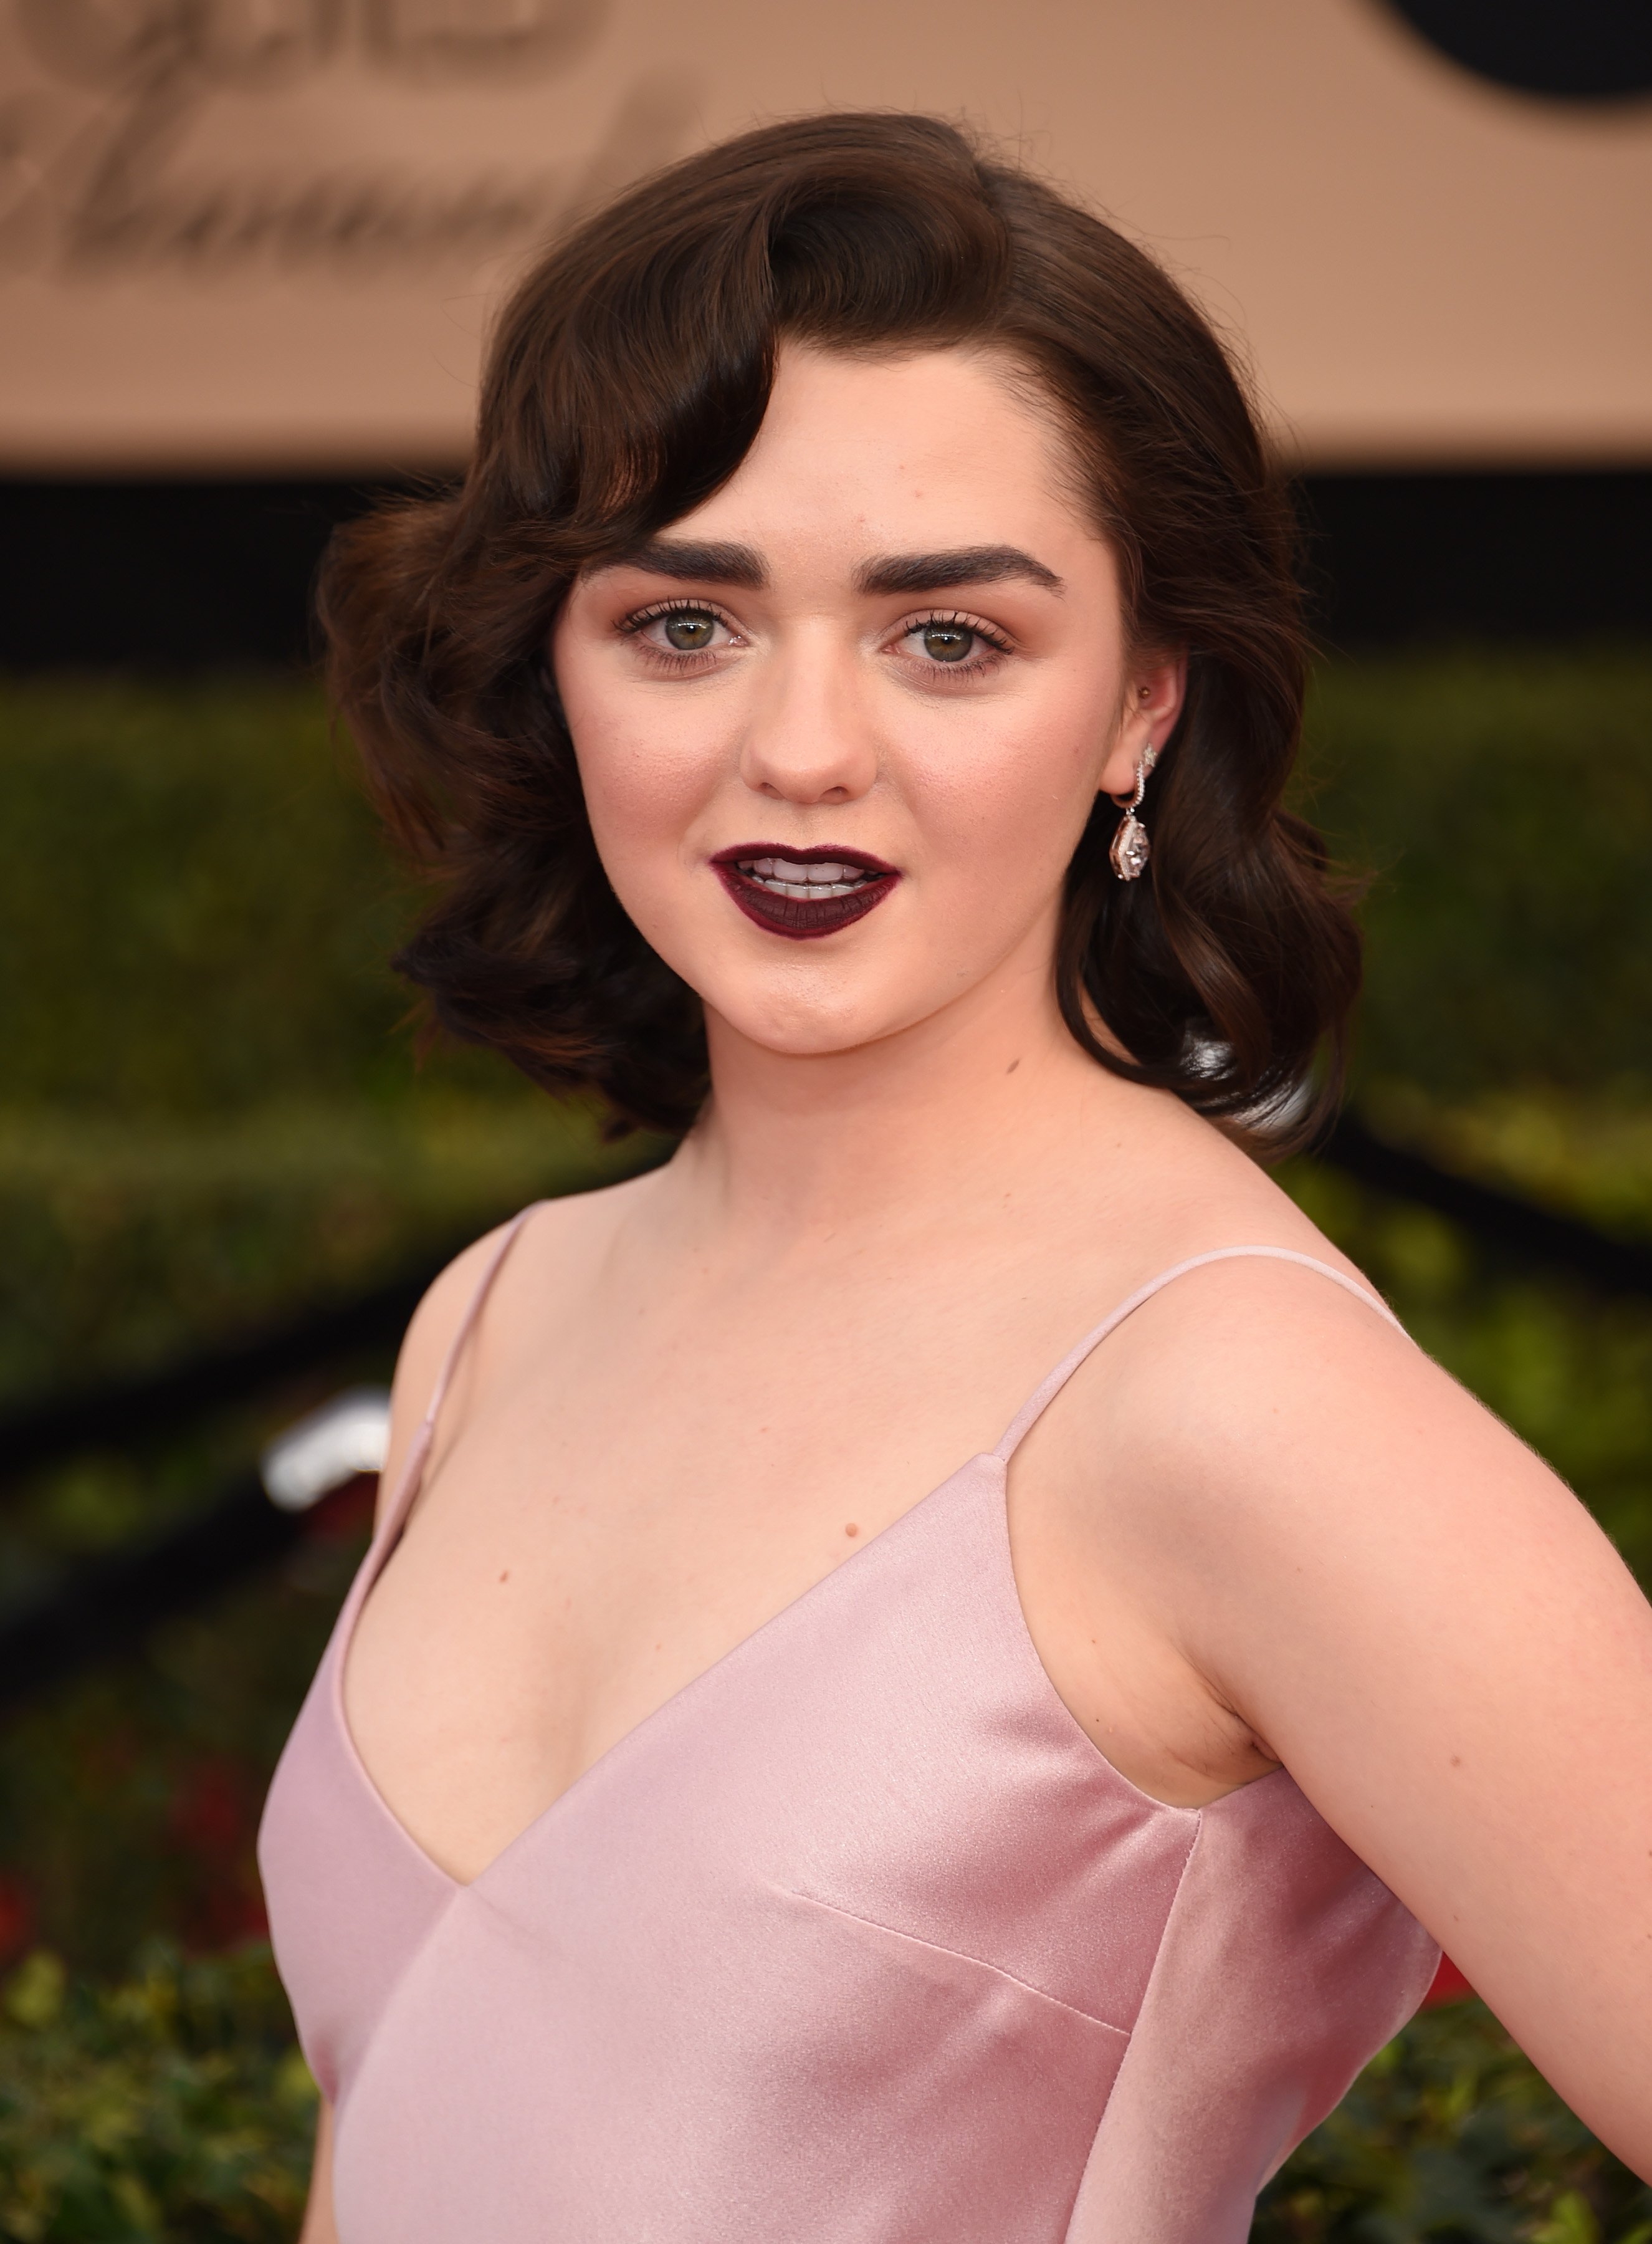 Maisie Williams 23rd Screen Actors Guild Awards 3 Satiny